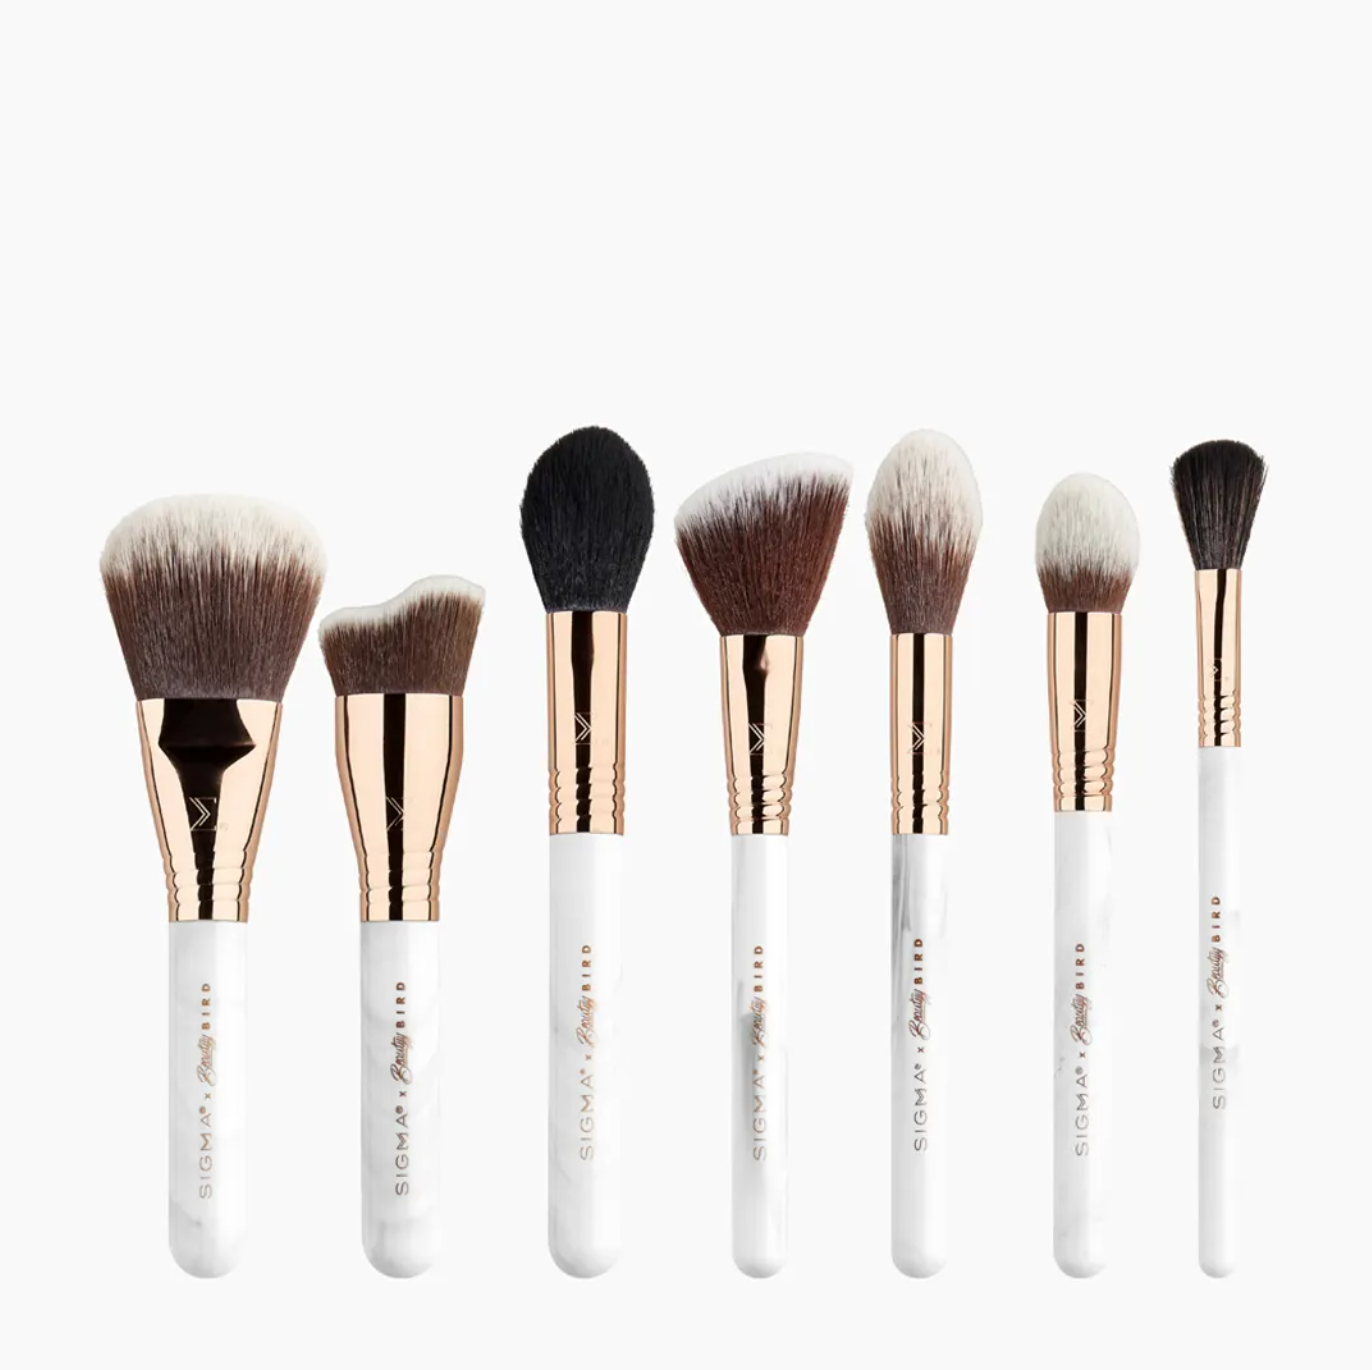 Sigma Beauty x Beautybird The Dream Brush Set - 19 Piece Brush Set and Brush Cup £274 value